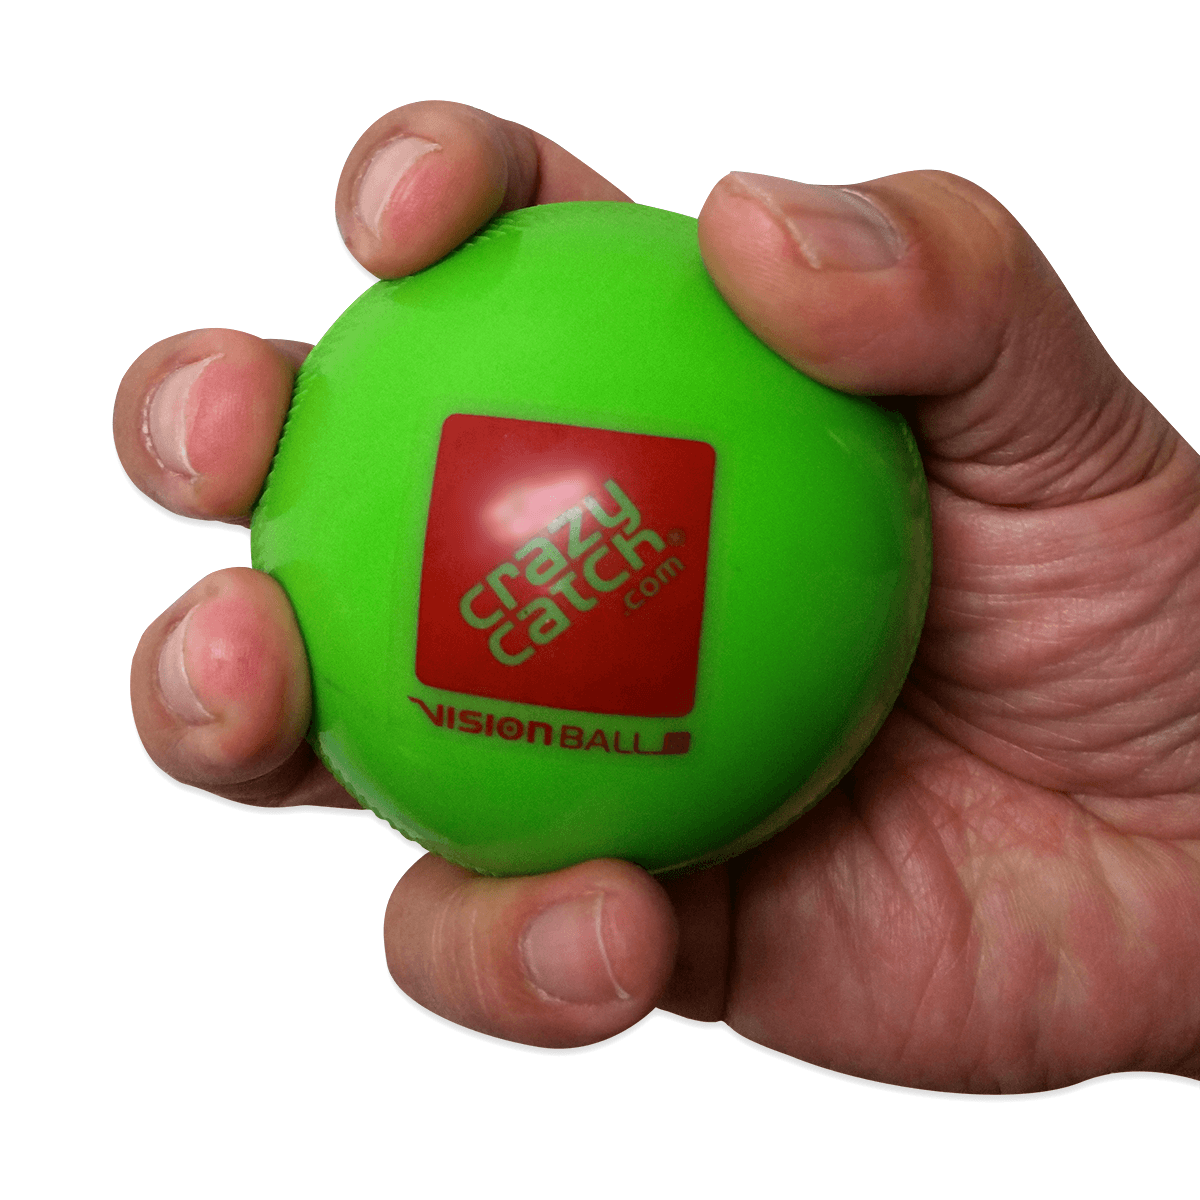 2 Hands -On Sphere Logo - Crazy Catch Training Ball, Level Improves Agility